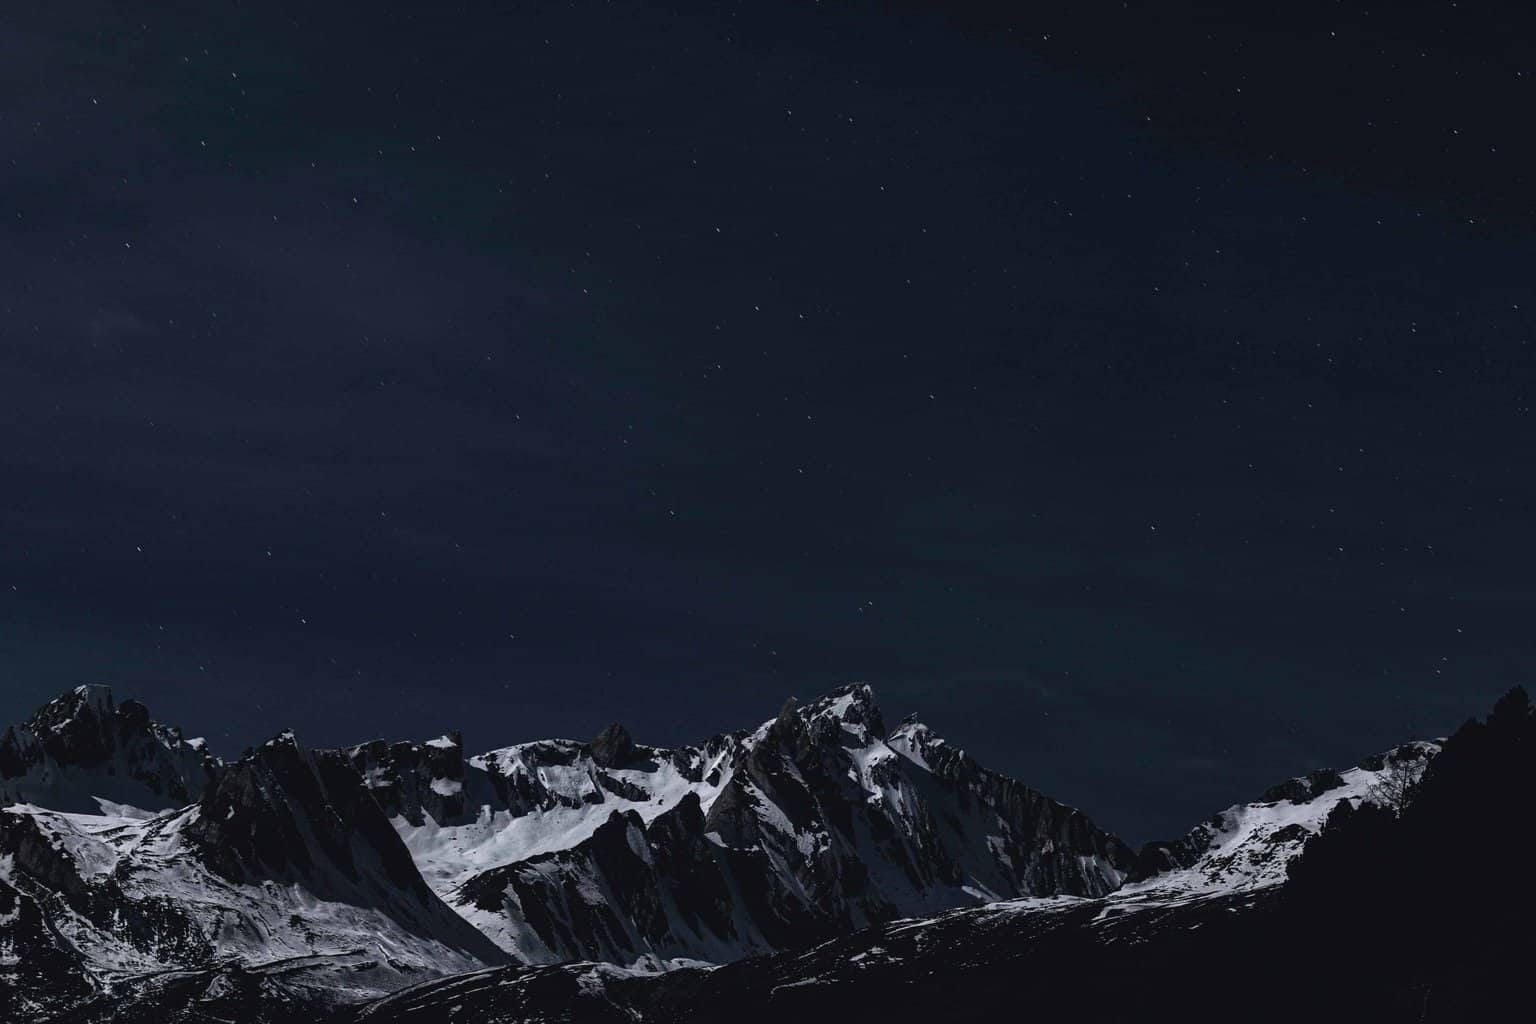 A mountain range at night with a starry sky.